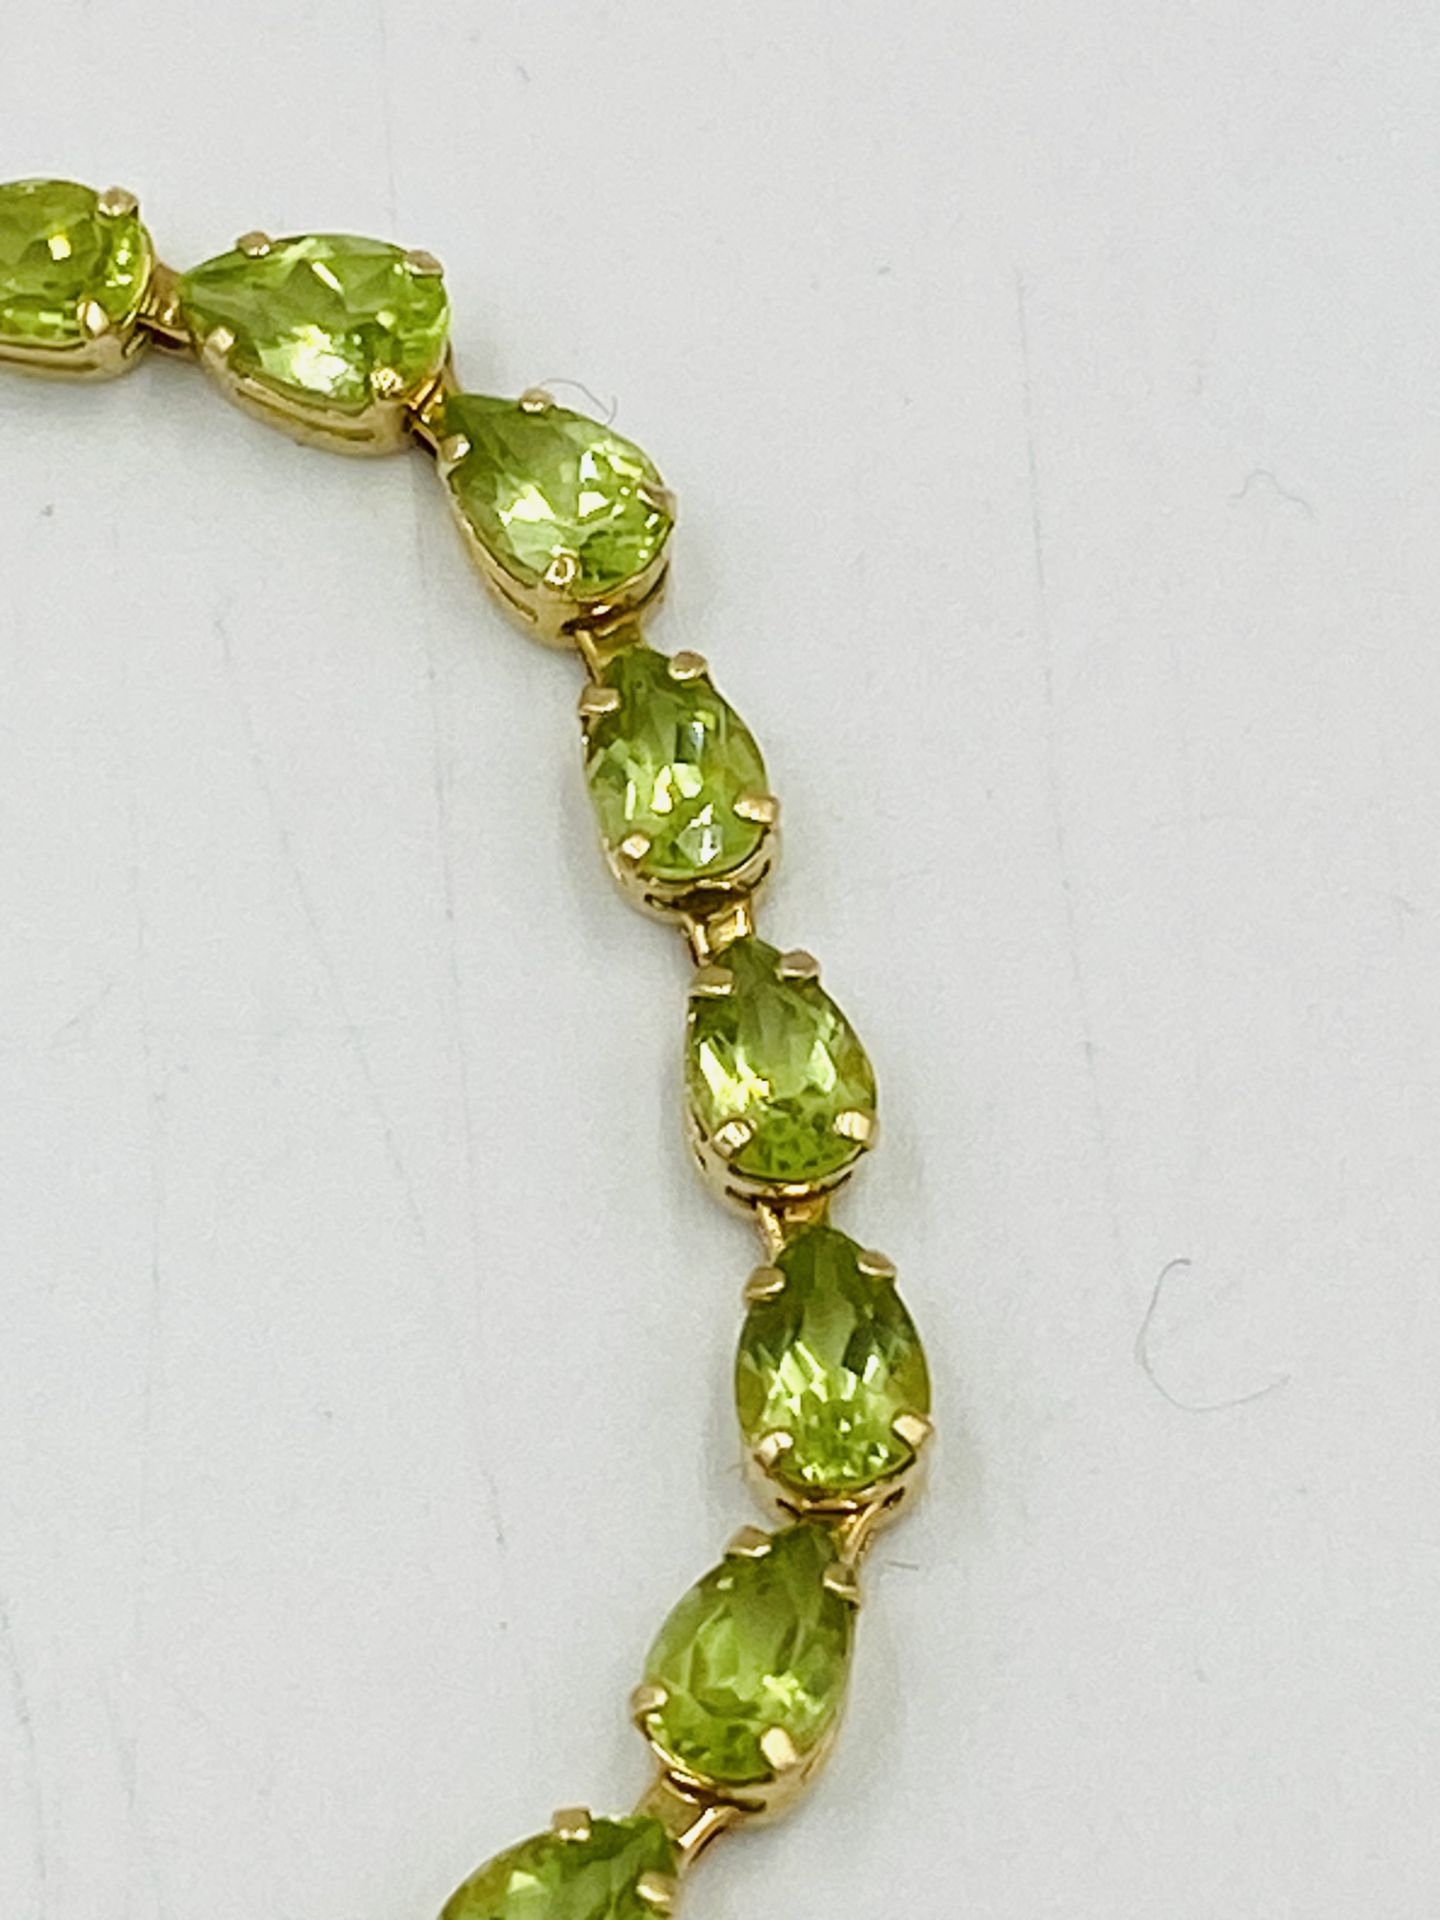 14ct gold bracelet set with green stones - Image 2 of 5